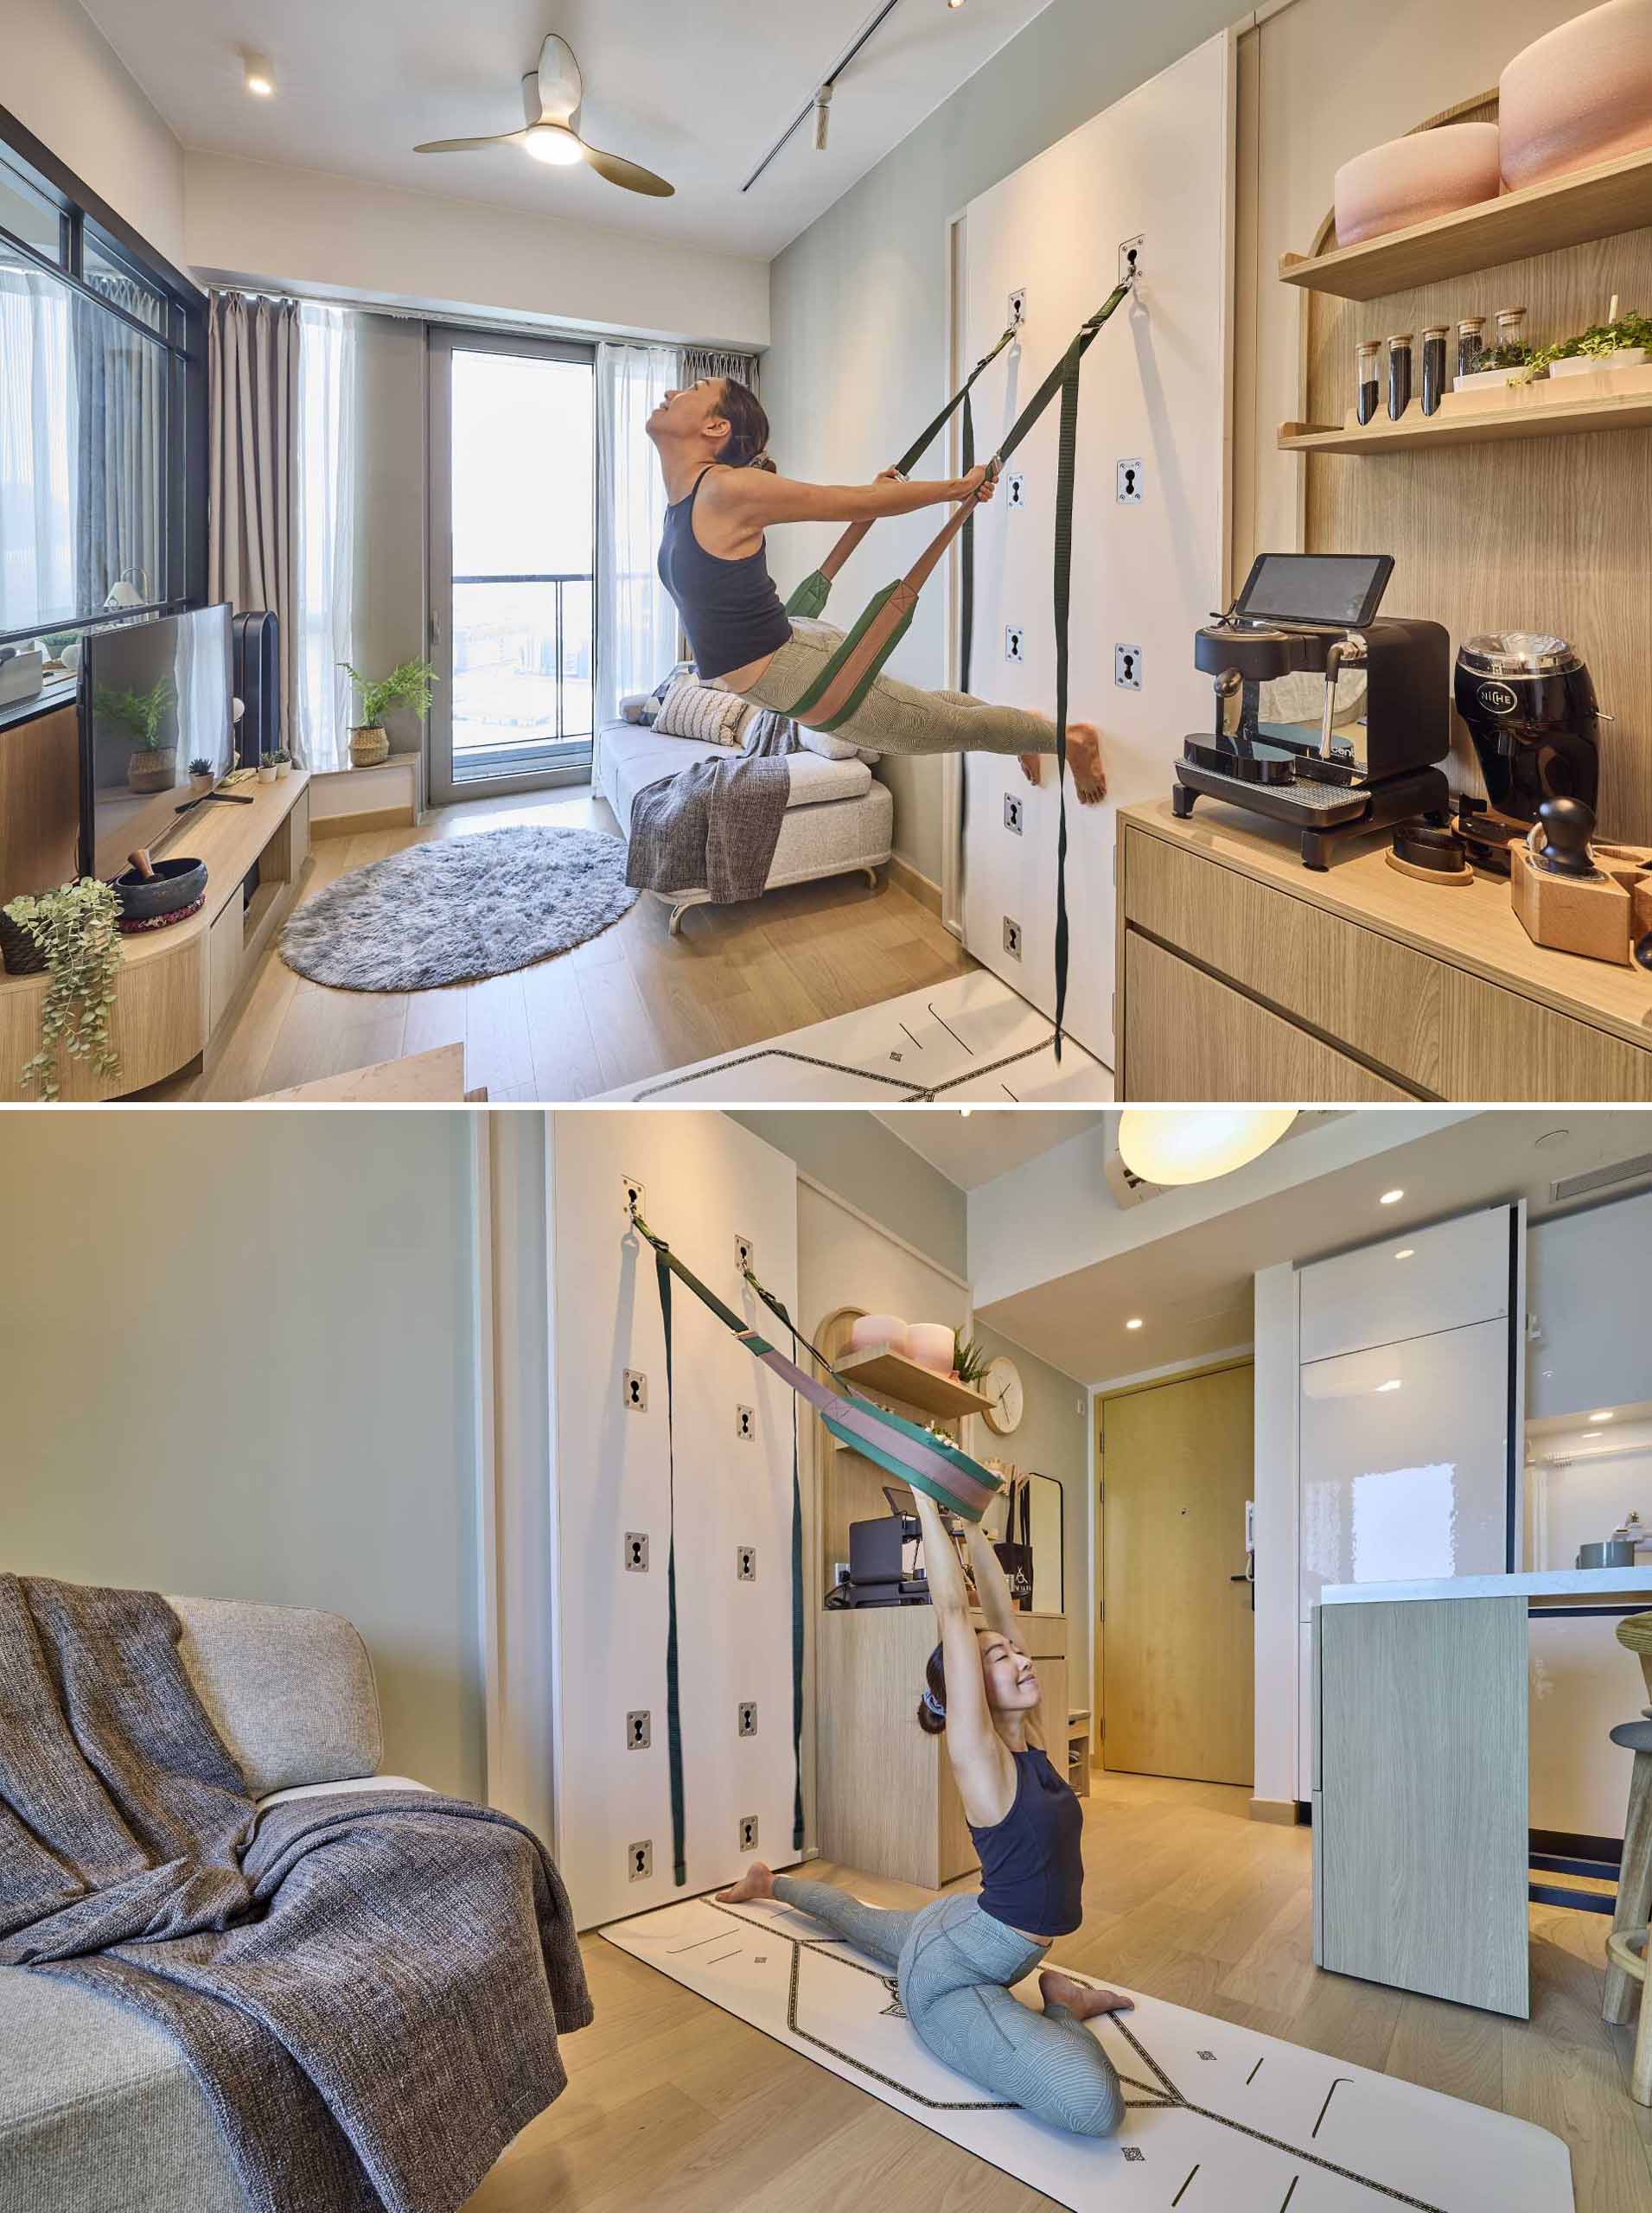 A small apartment includes safe and secured yoga wall with rope hooks and belts allows yoga to be practiced at home